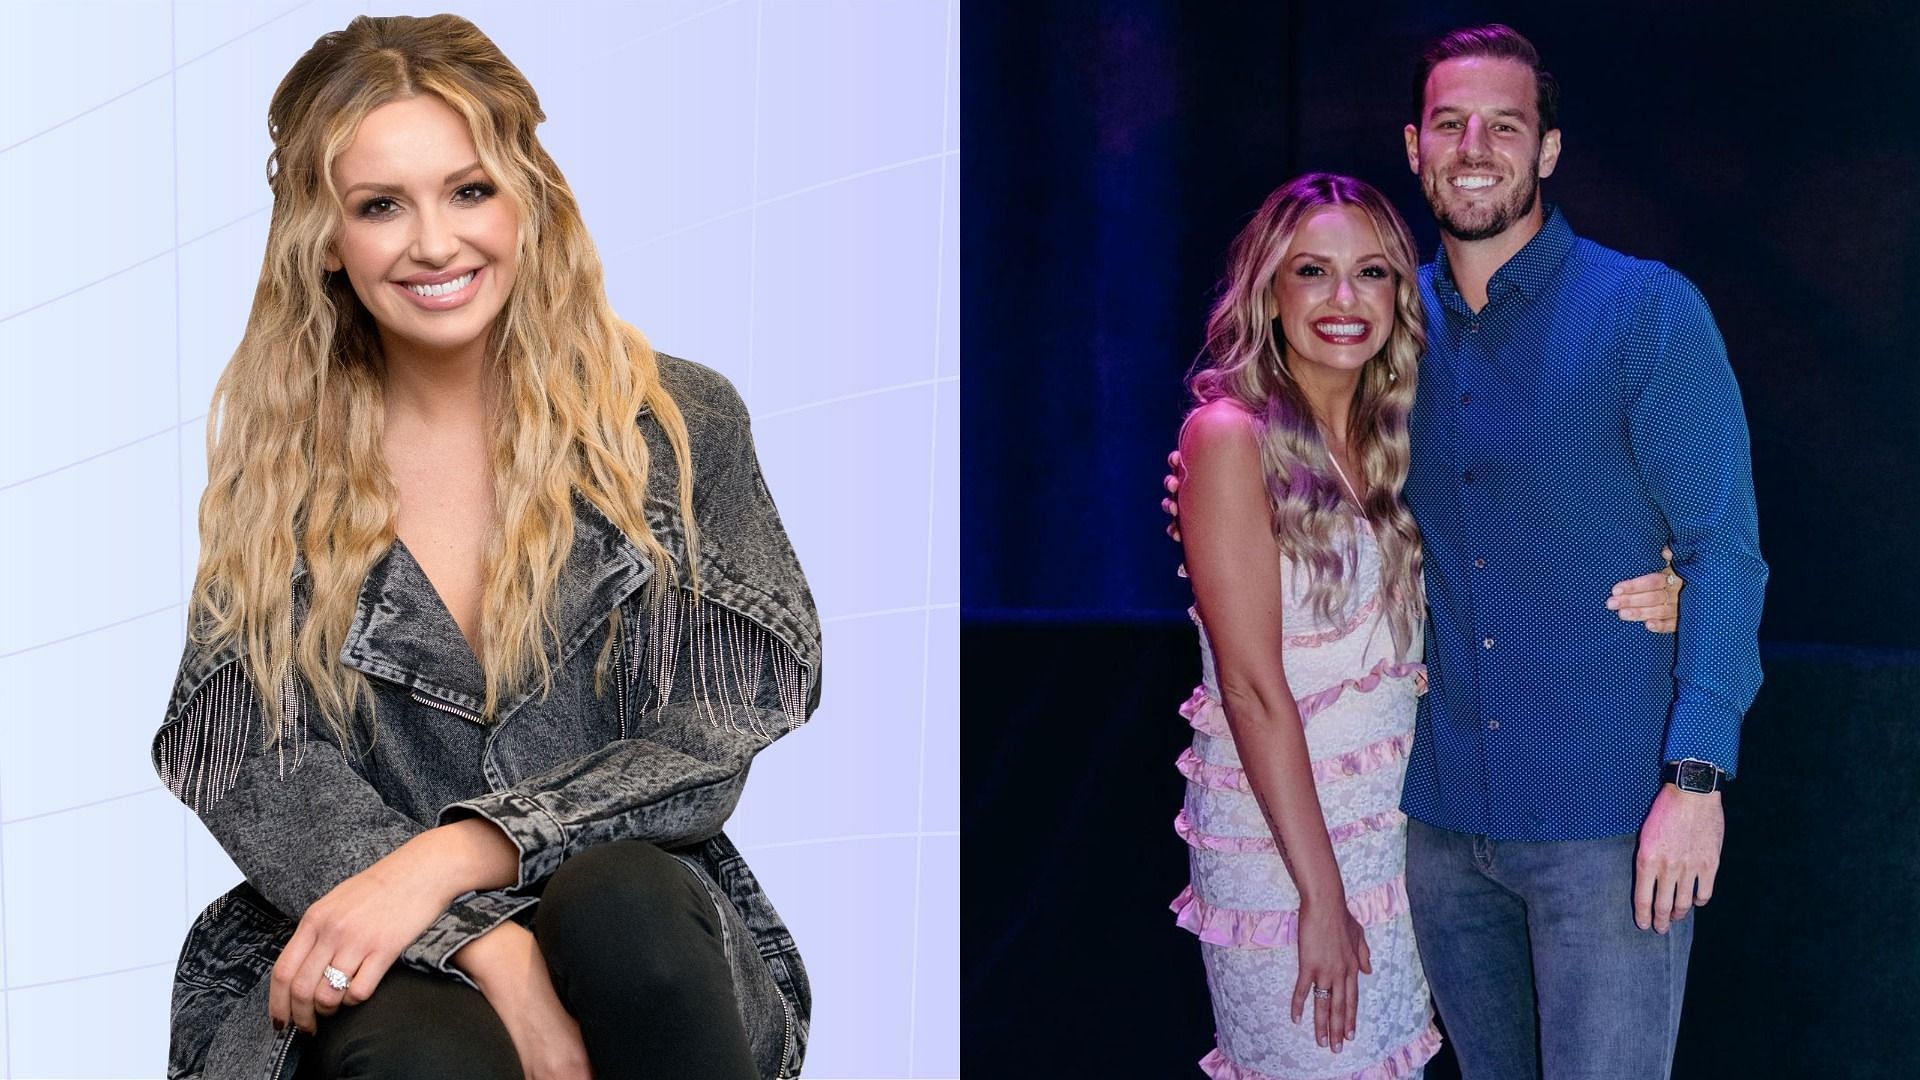 Carly Pearce celebrated her CMA win with her new boyfriend, Riley King (Image via Getty Images and Riley King/Instagram)